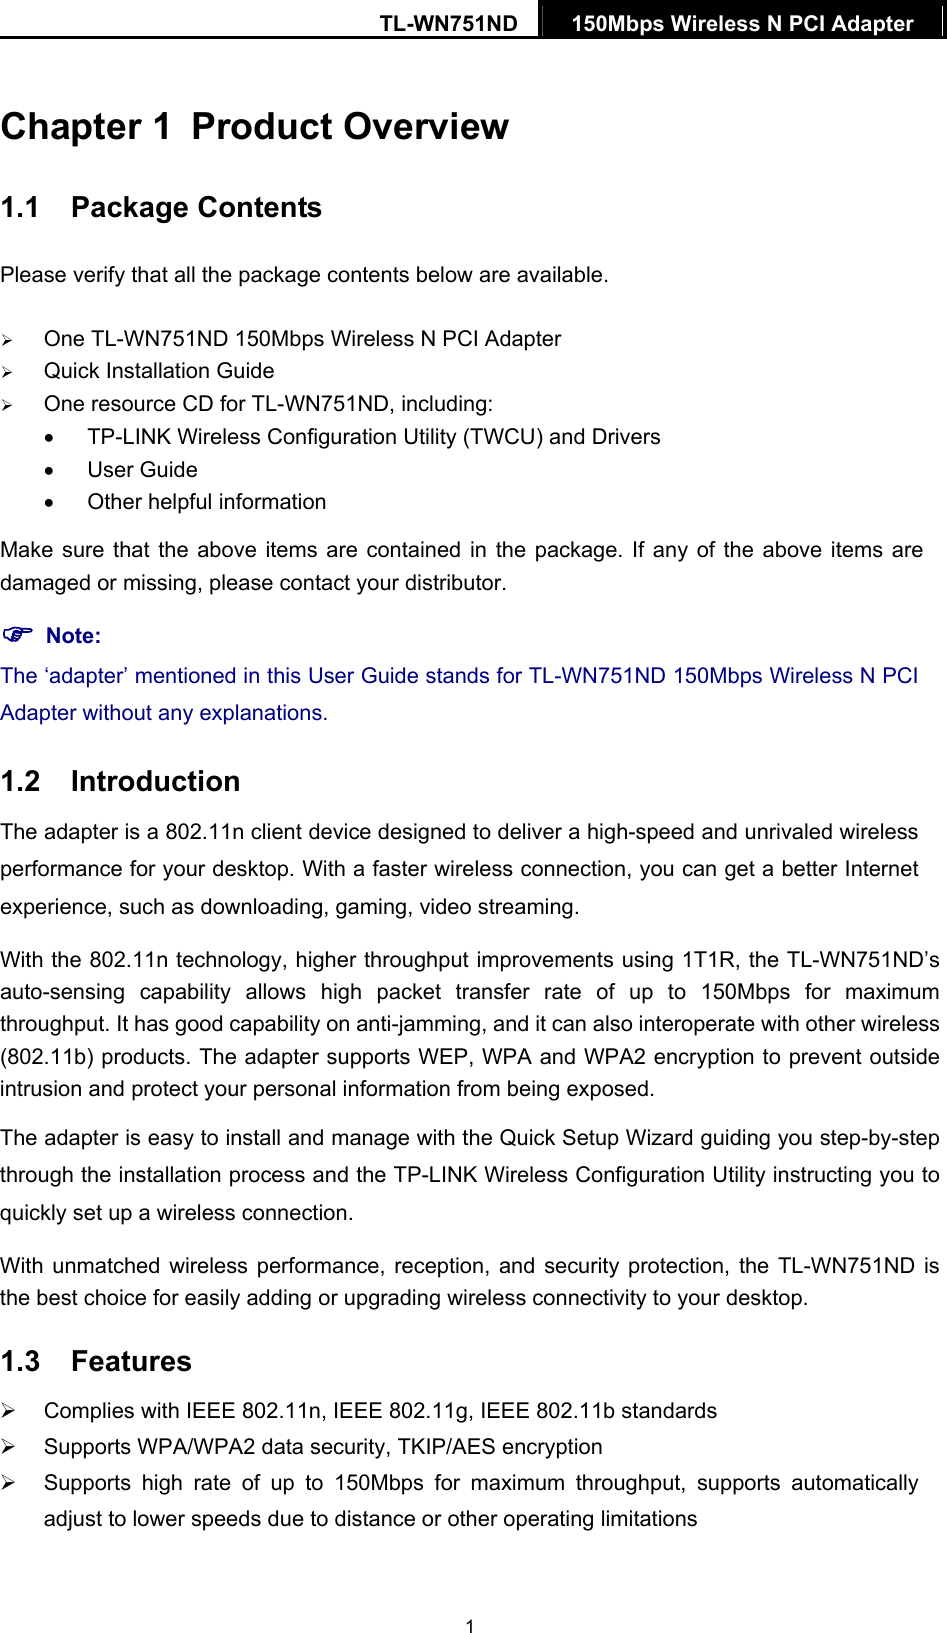 TL-WN751ND  150Mbps Wireless N PCI Adapter    1Chapter 1  Product Overview 1.1  Package Contents Please verify that all the package contents below are available. ¾ One TL-WN751ND 150Mbps Wireless N PCI Adapter ¾ Quick Installation Guide ¾ One resource CD for TL-WN751ND, including: •  TP-LINK Wireless Configuration Utility (TWCU) and Drivers • User Guide •  Other helpful information Make sure that the above items are contained in the package. If any of the above items are damaged or missing, please contact your distributor. ) Note: The ‘adapter’ mentioned in this User Guide stands for TL-WN751ND 150Mbps Wireless N PCI Adapter without any explanations. 1.2  Introduction The adapter is a 802.11n client device designed to deliver a high-speed and unrivaled wireless performance for your desktop. With a faster wireless connection, you can get a better Internet experience, such as downloading, gaming, video streaming. With the 802.11n technology, higher throughput improvements using 1T1R, the TL-WN751ND’s auto-sensing capability allows high packet transfer rate of up to 150Mbps for maximum throughput. It has good capability on anti-jamming, and it can also interoperate with other wireless (802.11b) products. The adapter supports WEP, WPA and WPA2 encryption to prevent outside intrusion and protect your personal information from being exposed. The adapter is easy to install and manage with the Quick Setup Wizard guiding you step-by-step through the installation process and the TP-LINK Wireless Configuration Utility instructing you to quickly set up a wireless connection. With unmatched wireless performance, reception, and security protection, the TL-WN751ND is the best choice for easily adding or upgrading wireless connectivity to your desktop. 1.3  Features ¾  Complies with IEEE 802.11n, IEEE 802.11g, IEEE 802.11b standards ¾  Supports WPA/WPA2 data security, TKIP/AES encryption ¾  Supports high rate of up to 150Mbps for maximum throughput, supports automatically adjust to lower speeds due to distance or other operating limitations 